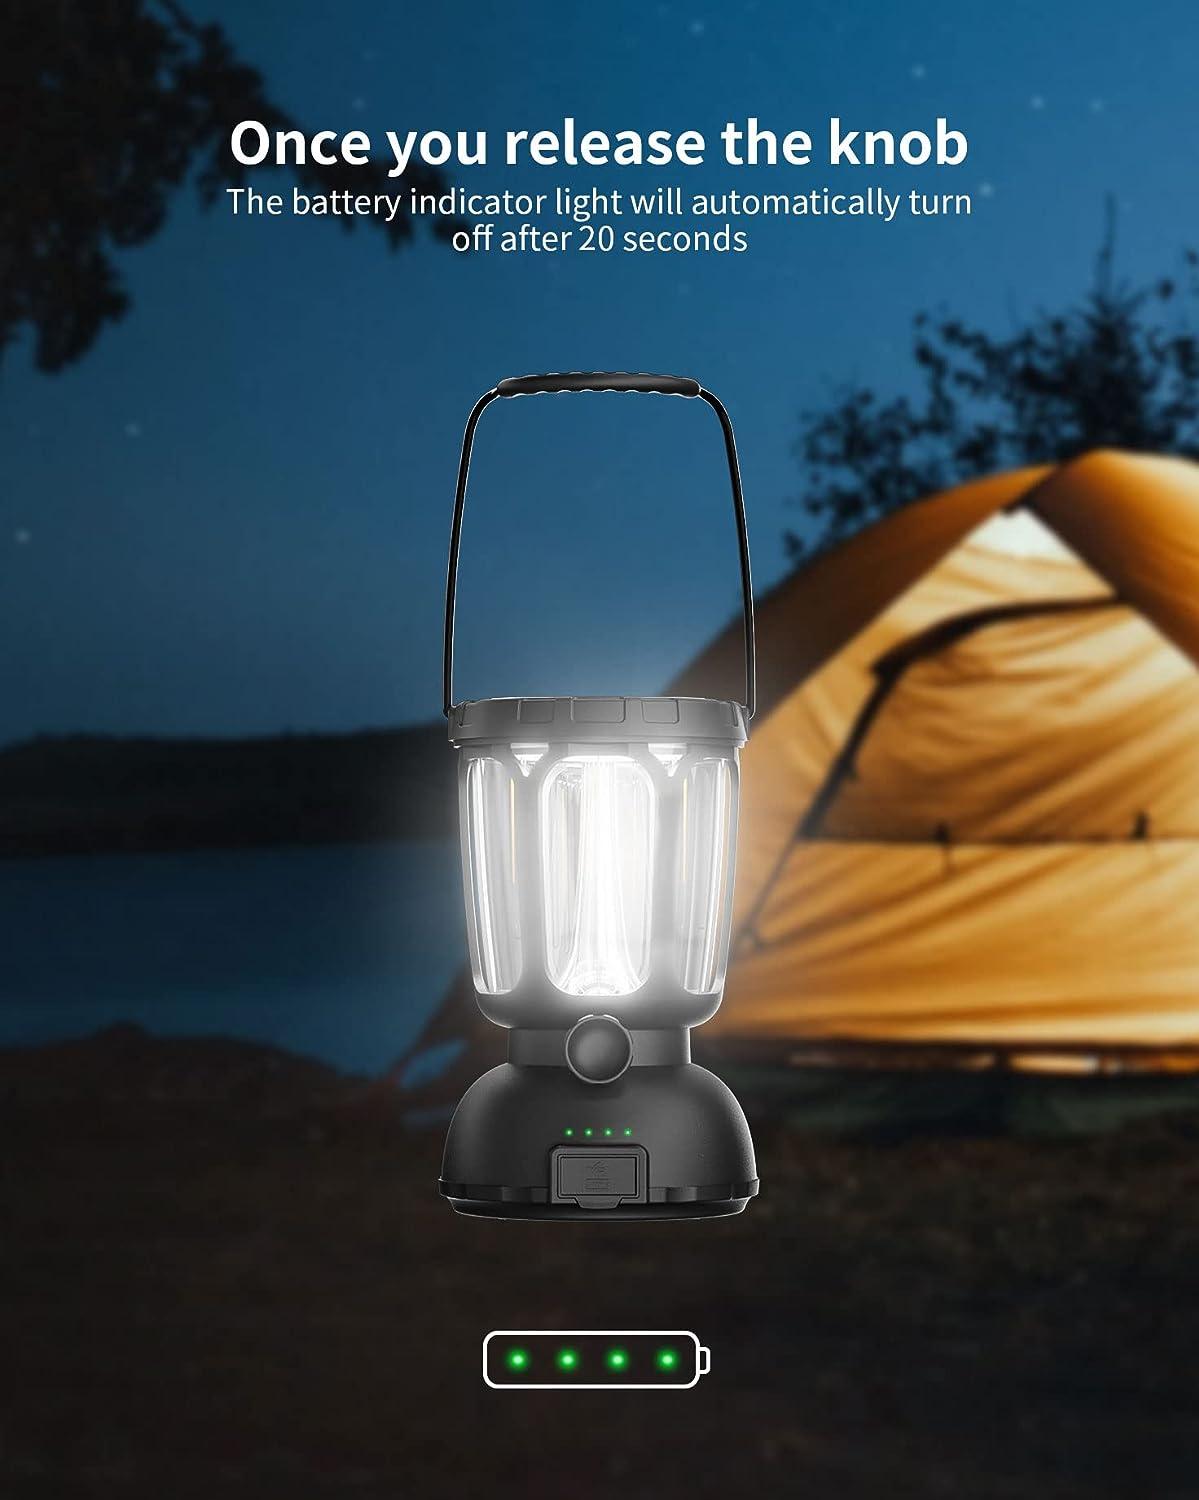 Mesqool 6000 Camping Lantern Rechargeable Battery Powered, Solar Crank LED  Survival Lanterns for Power Outages Emergency Hurricane, 650LM, Dimmable